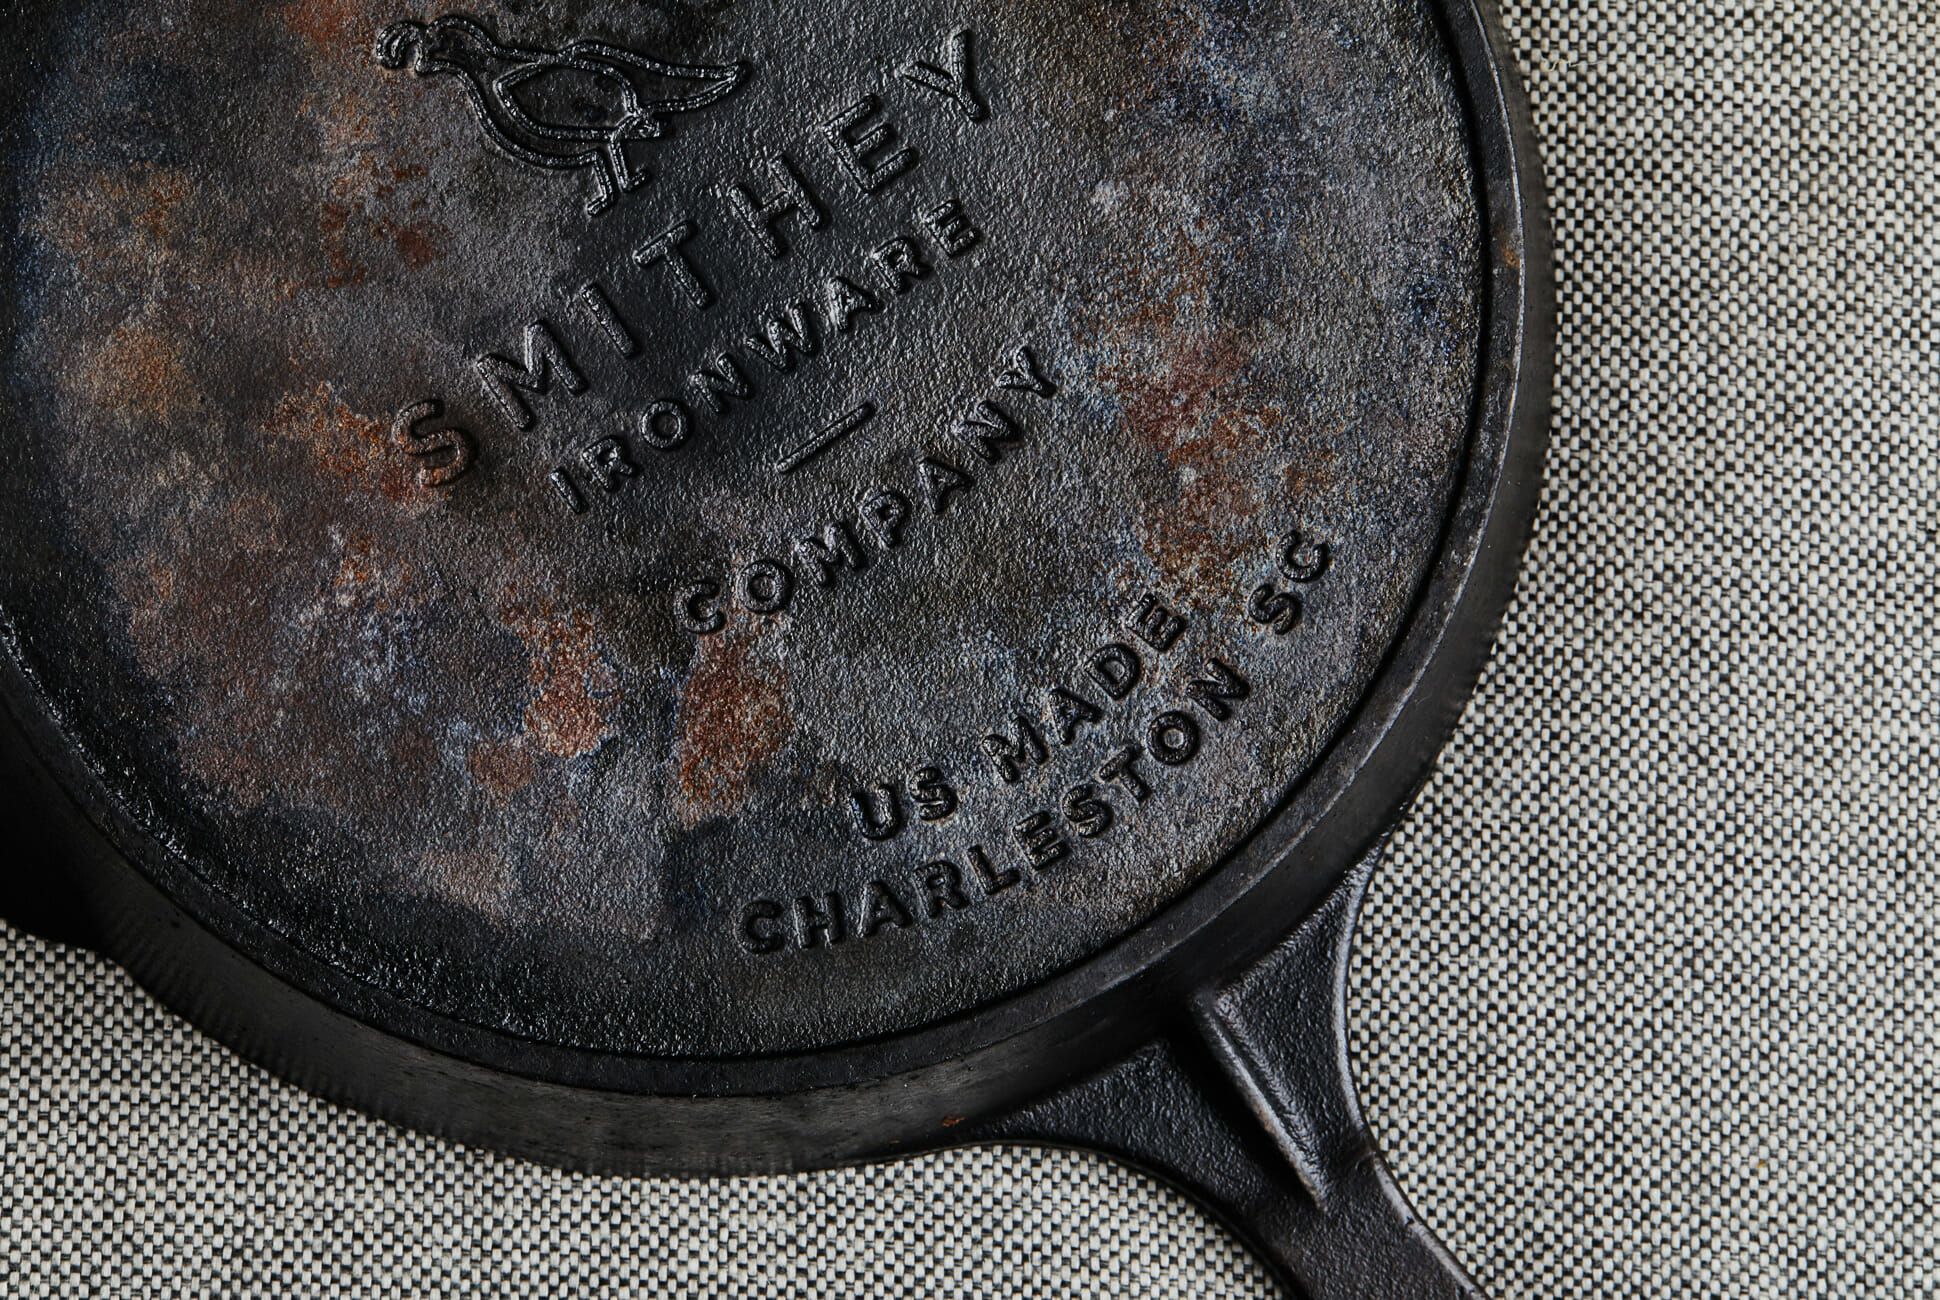  The Ringer - The Original Stainless Steel Cast Iron